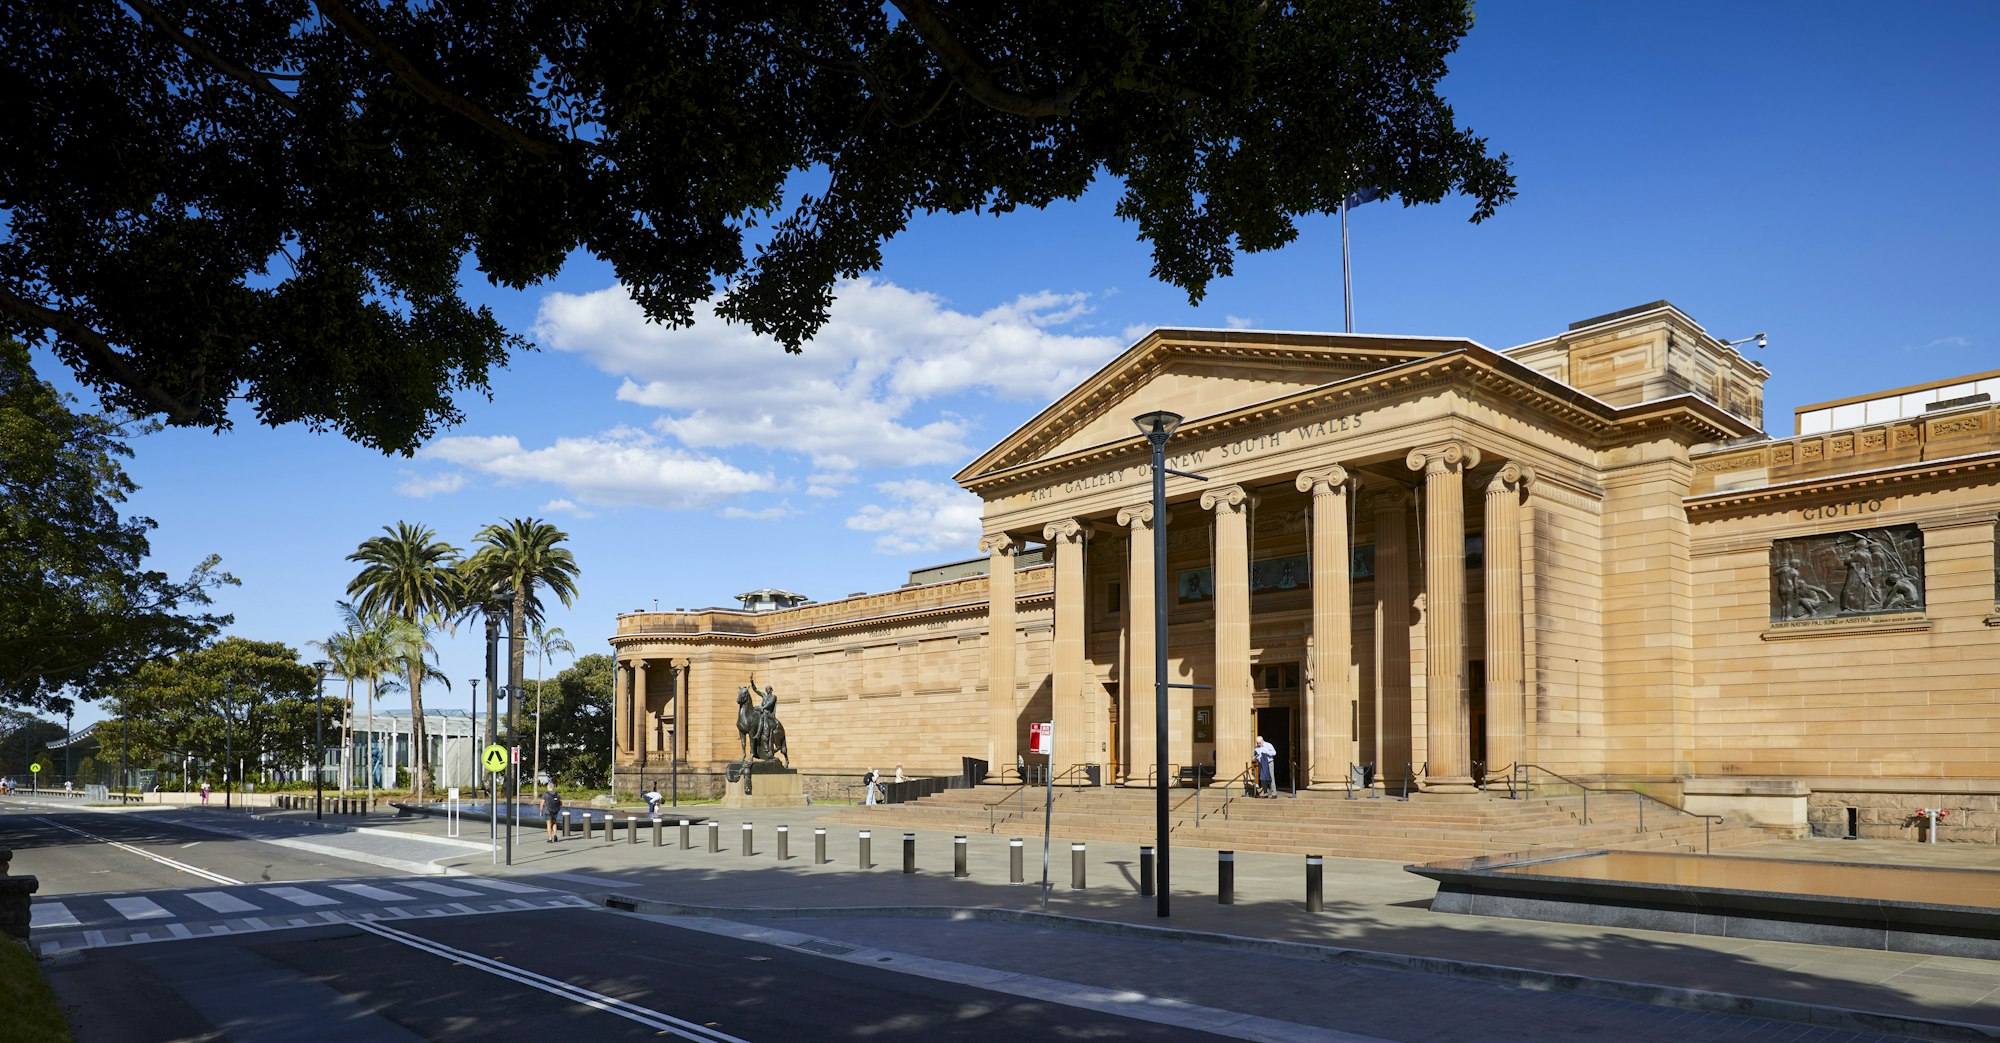 View across a street of a large sandstone building with a portico and more distant trees and building